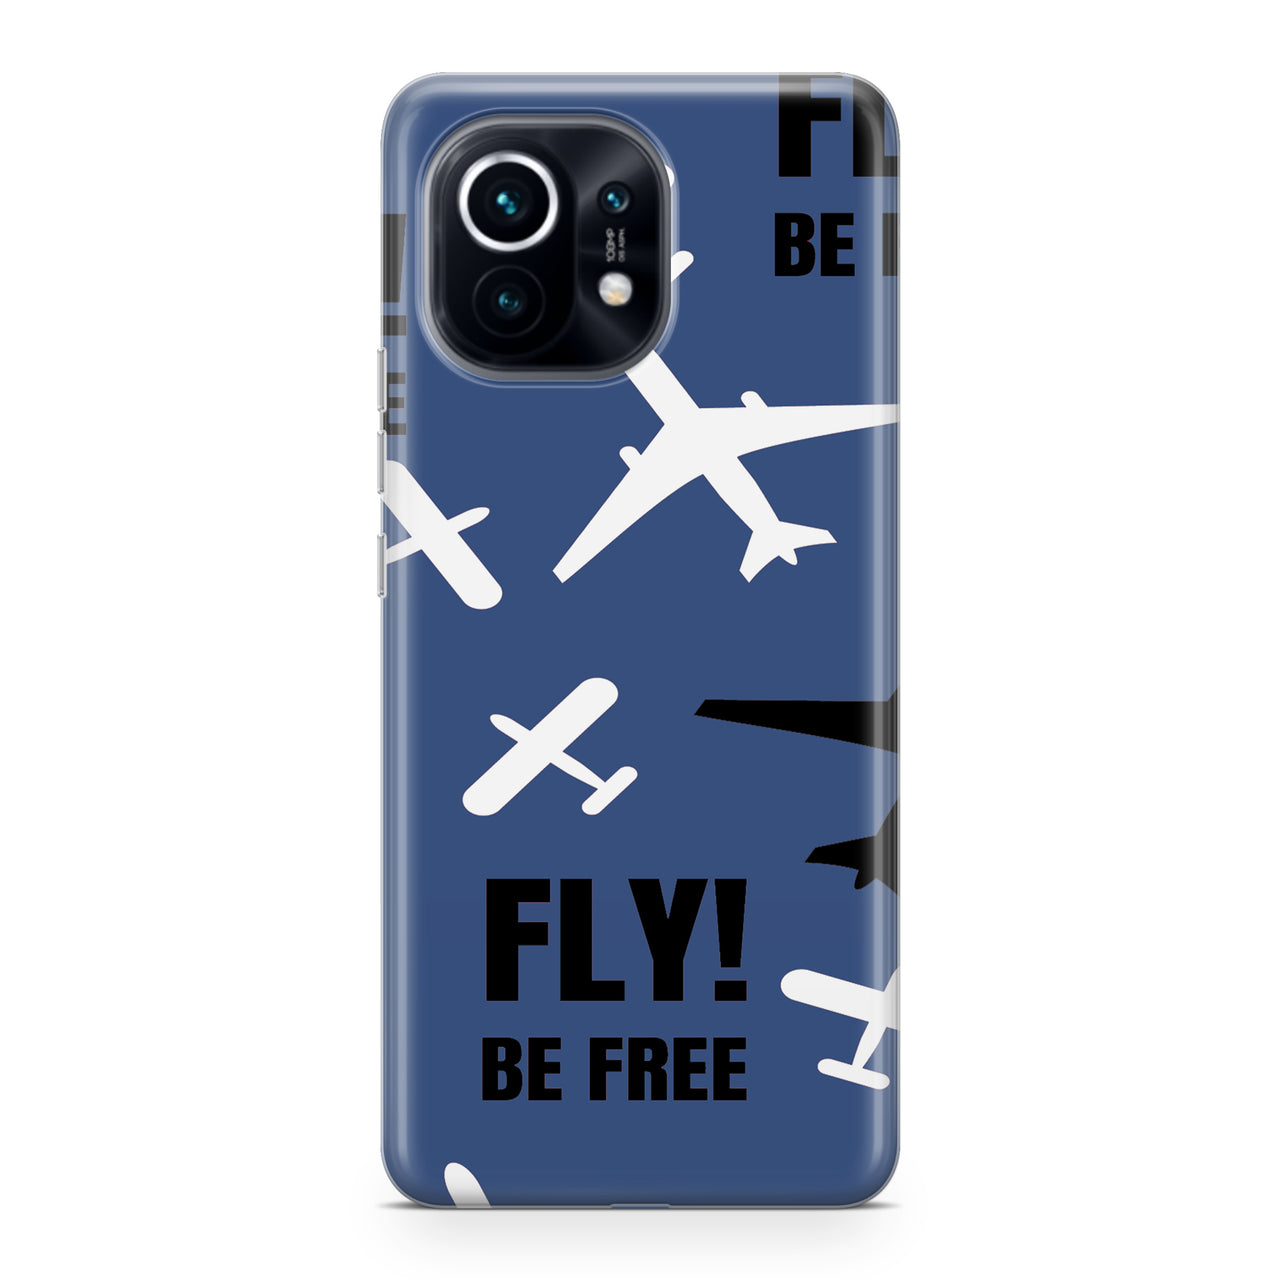 Fly Be Free Blue Designed Xiaomi Cases